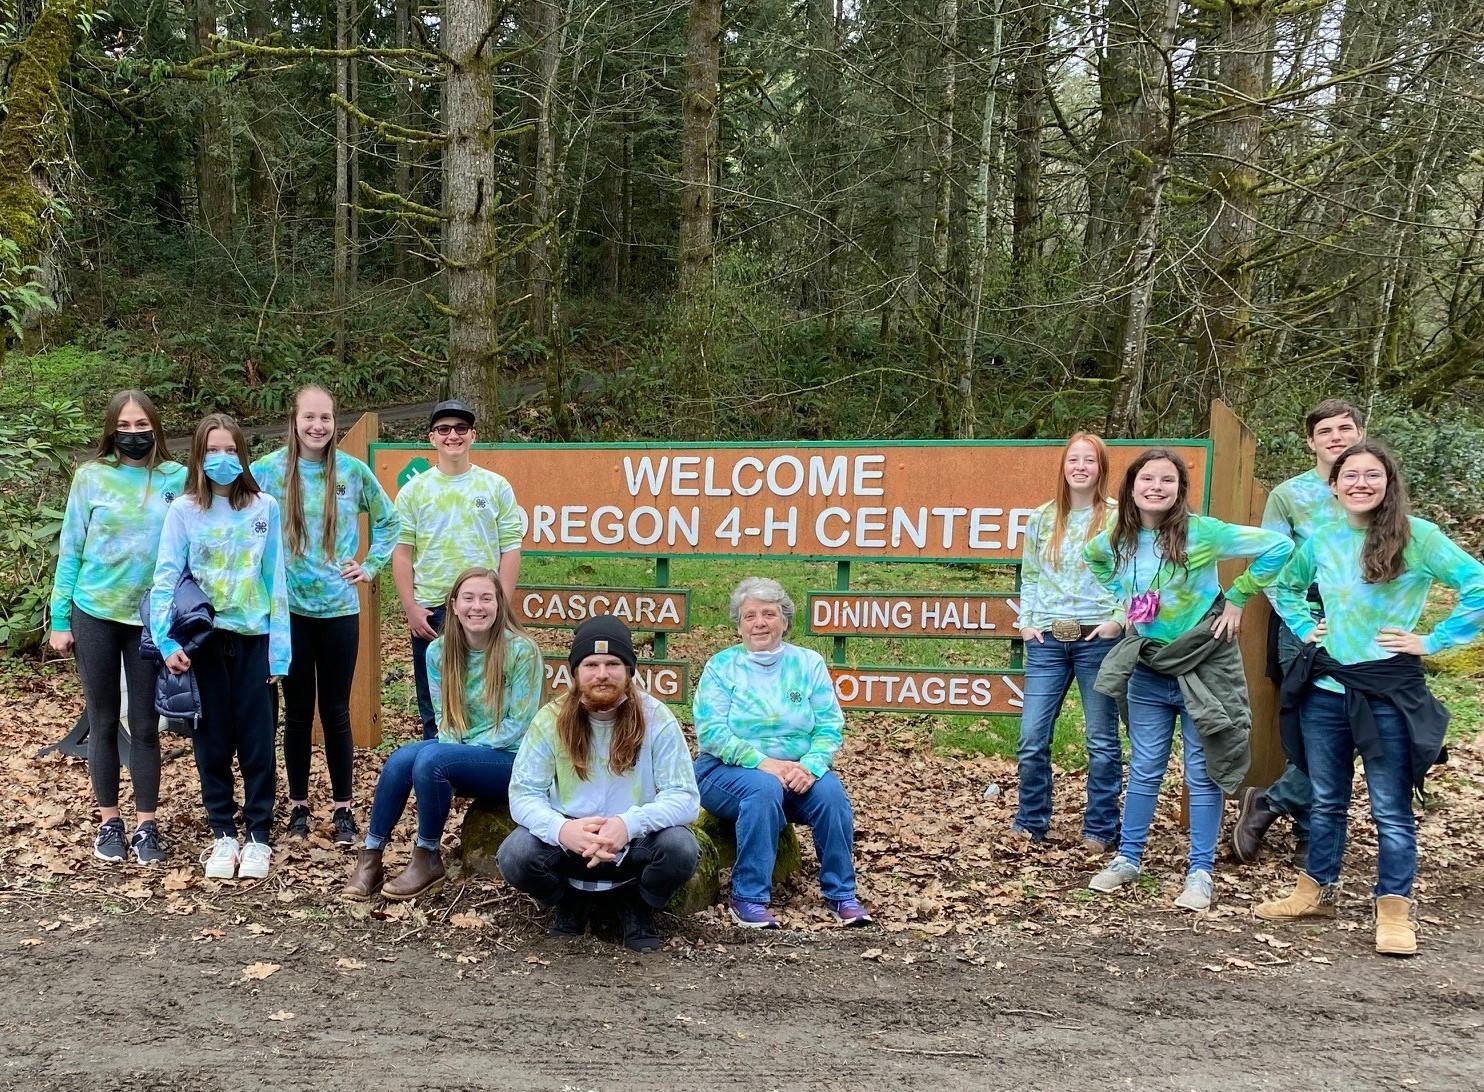 A group of 4-H youth participants and leaders stand outdoors in front of a sign reading "Welcome Oregon 4-H Center"